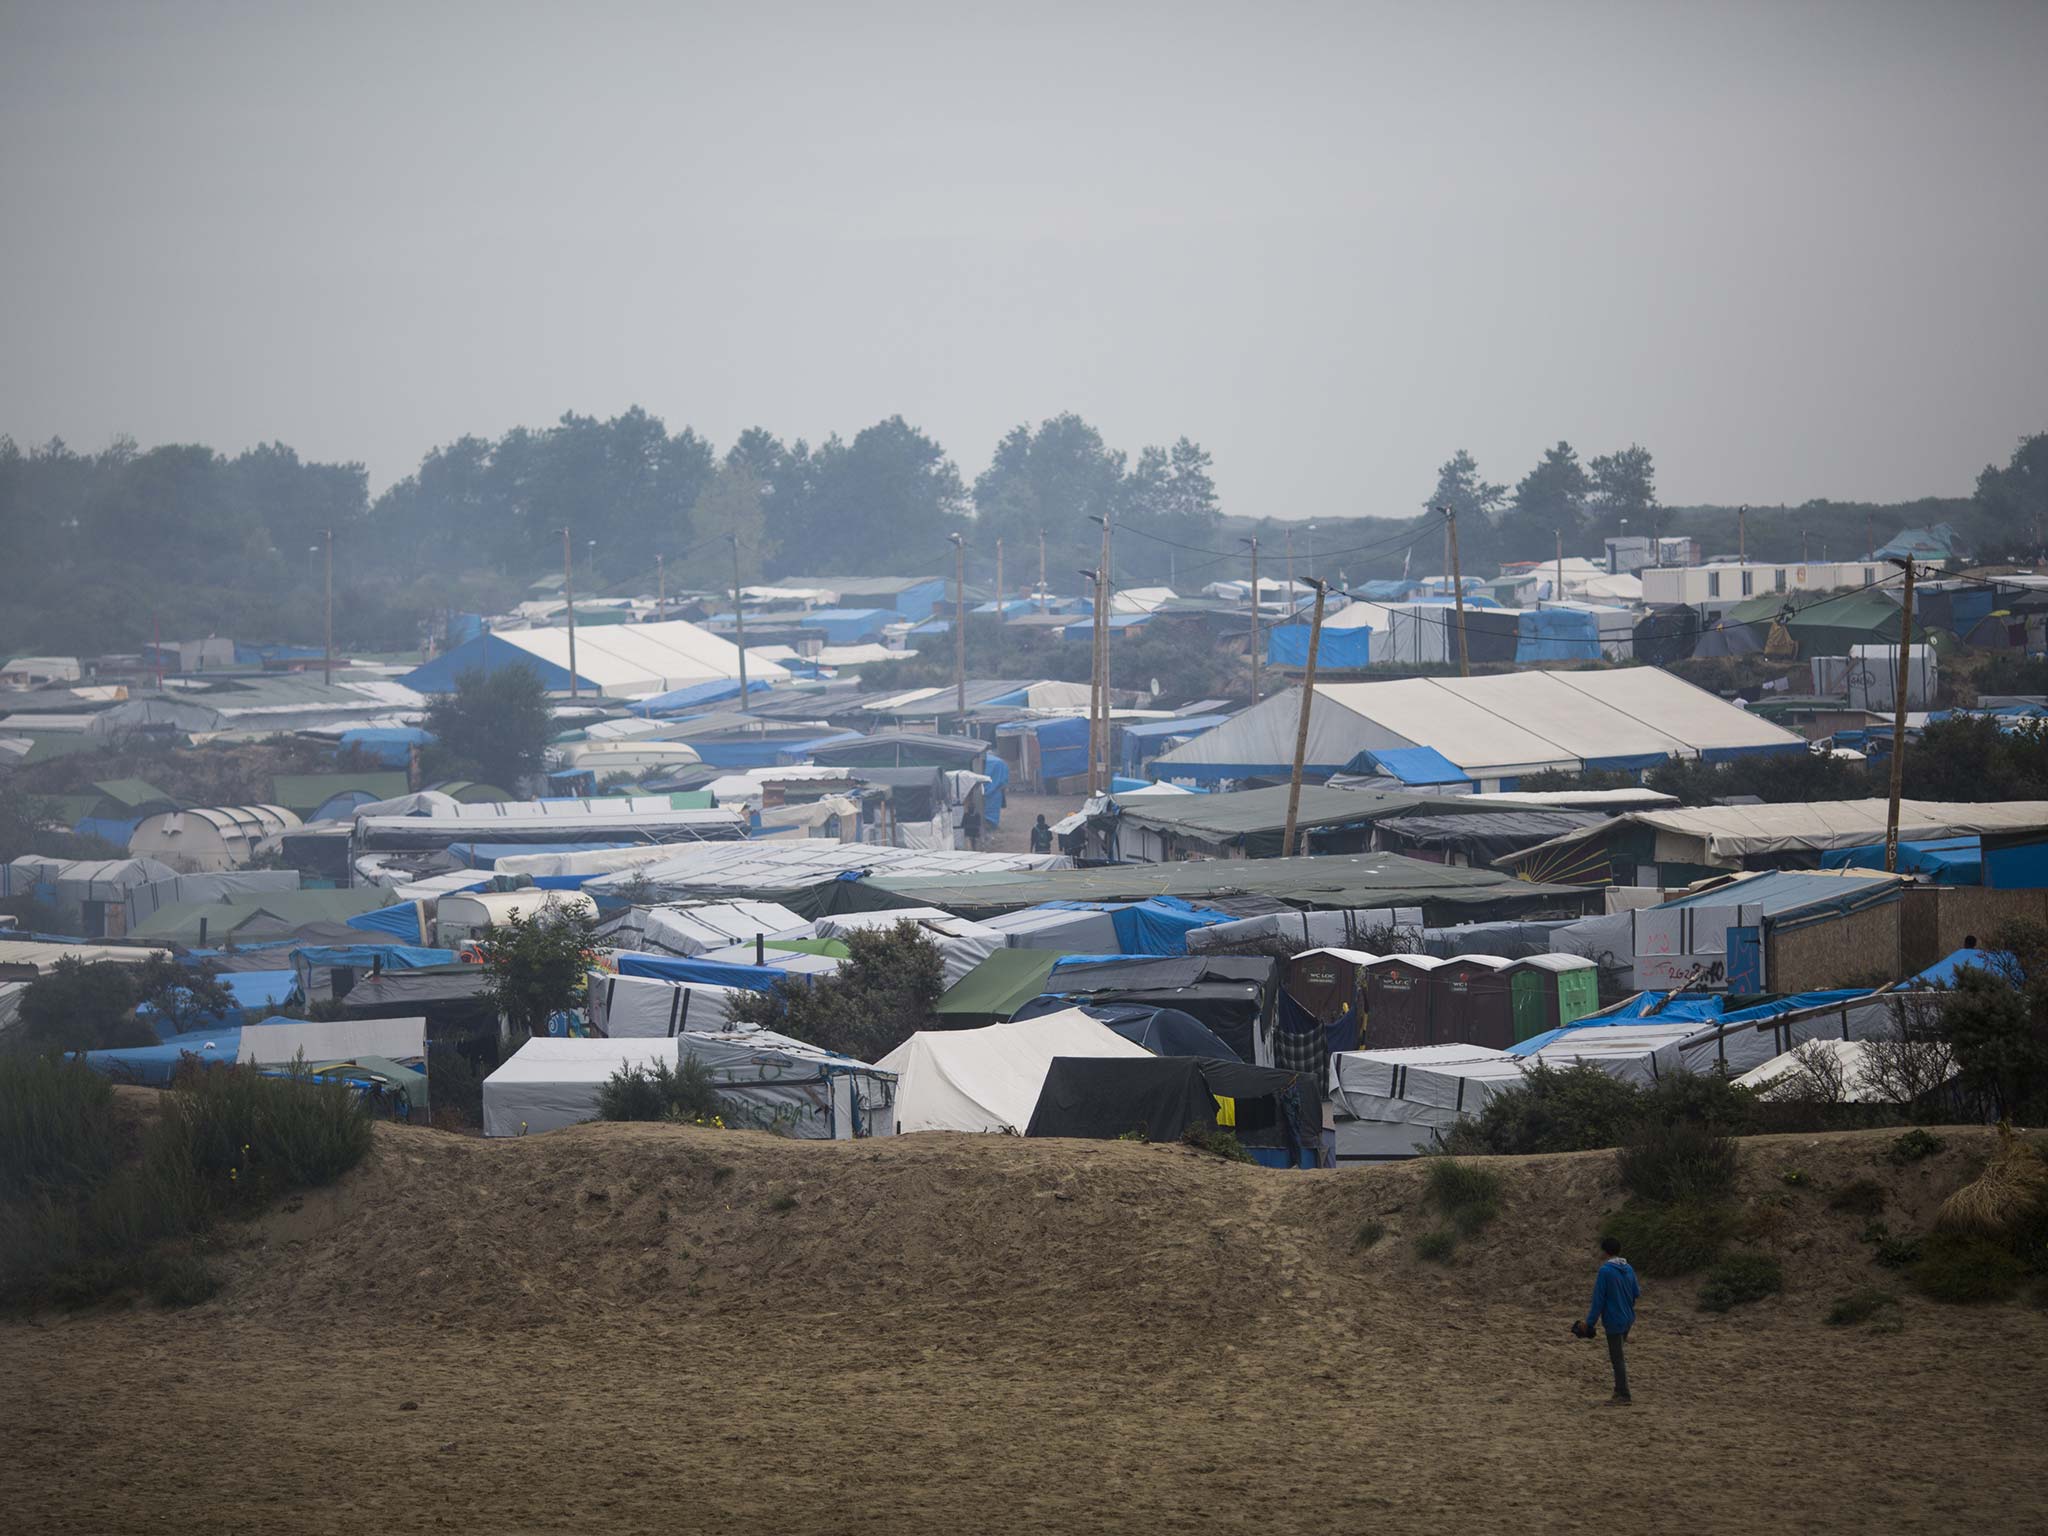 Despite the clearing of the Calais ‘jungle’, pictured, migrants have remained in the area